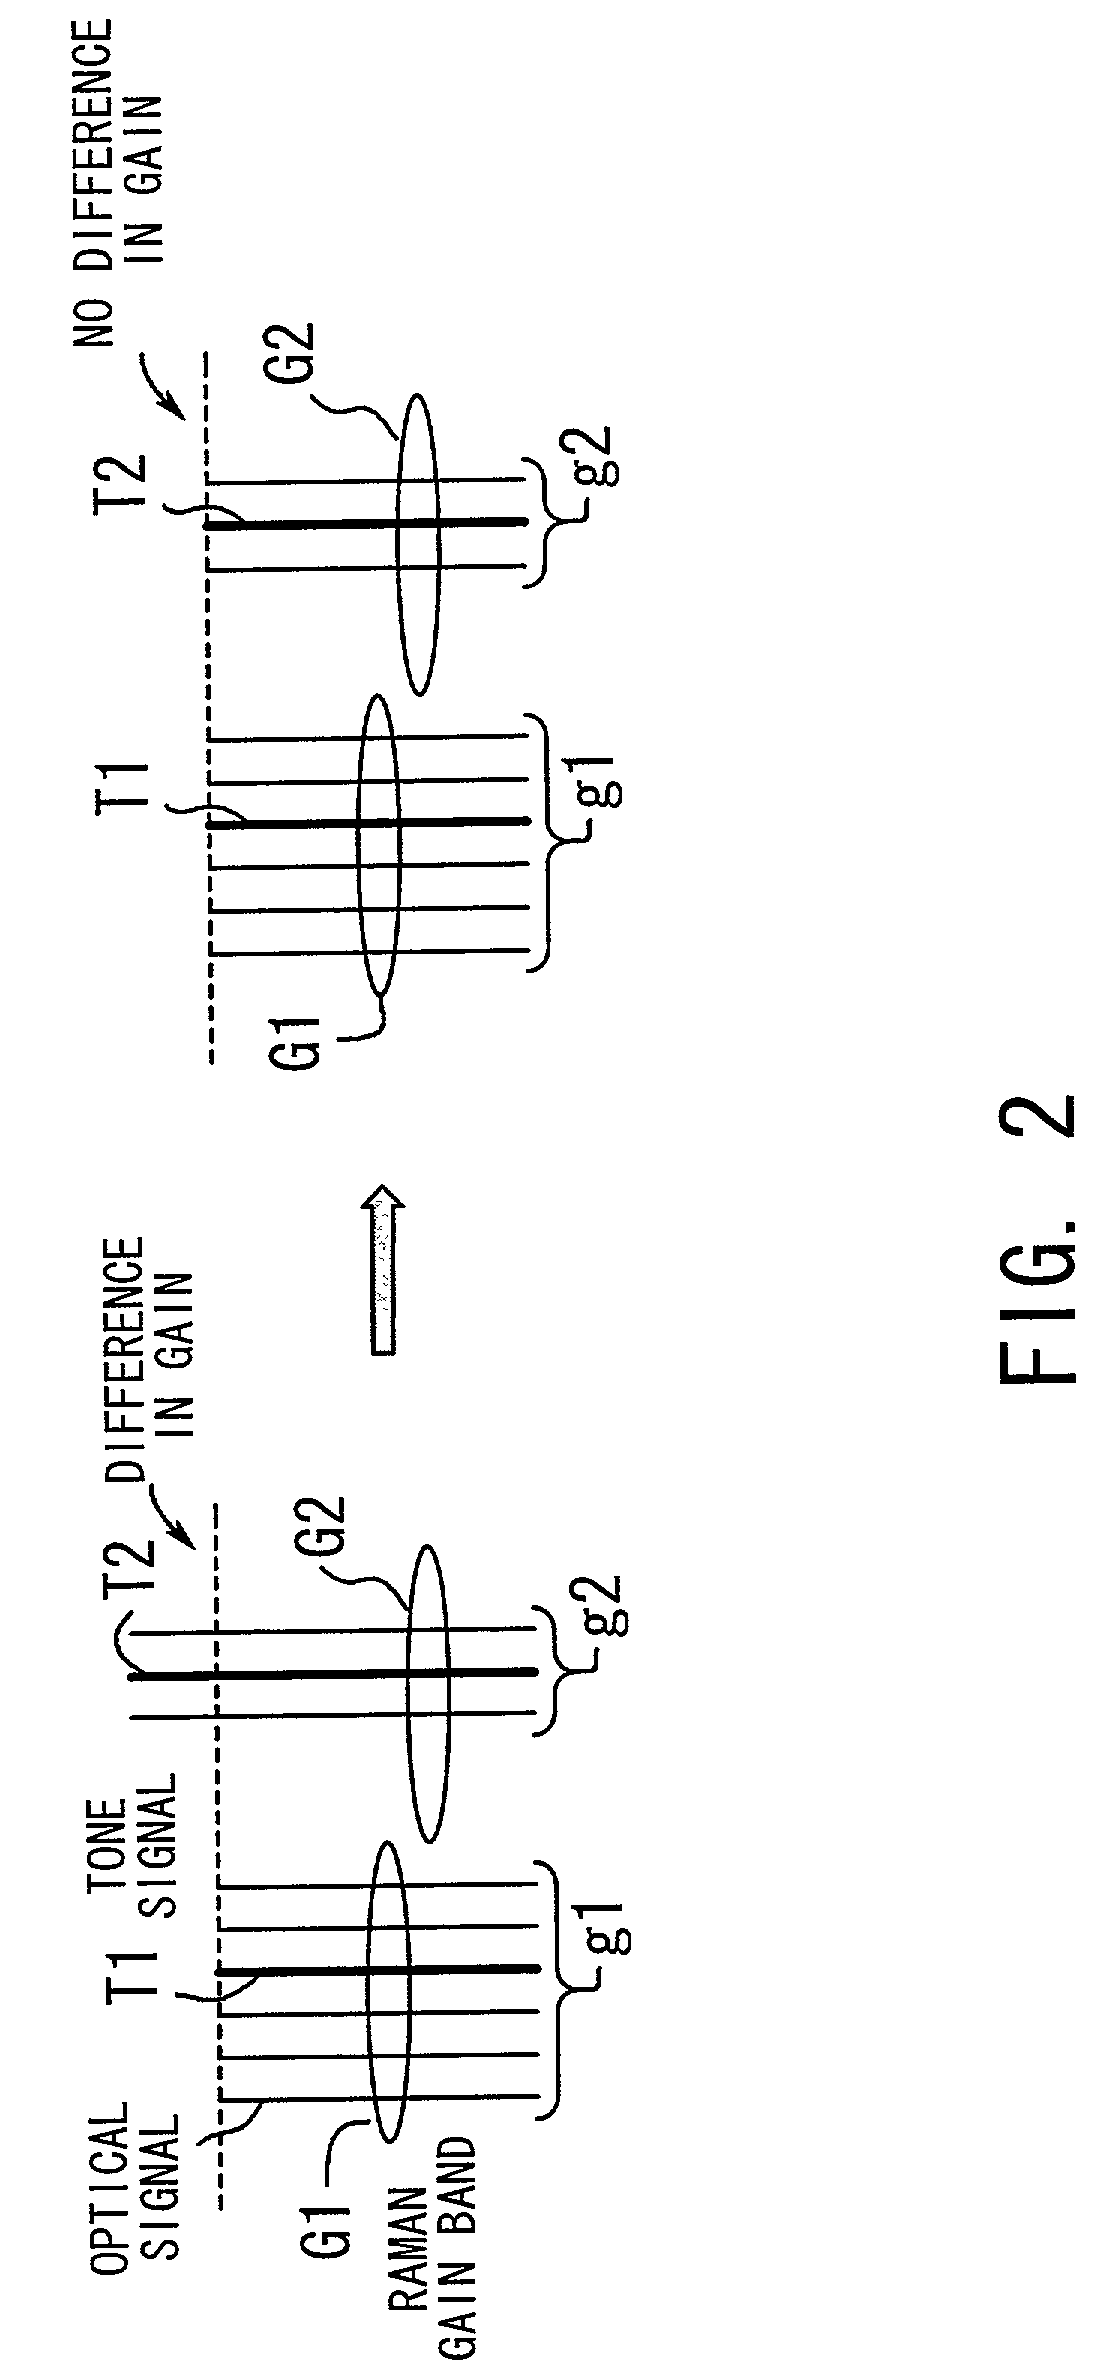 Optical transmission system in which gains in gain bands are remotely controlled by transmitting tone signals having variable characteristics